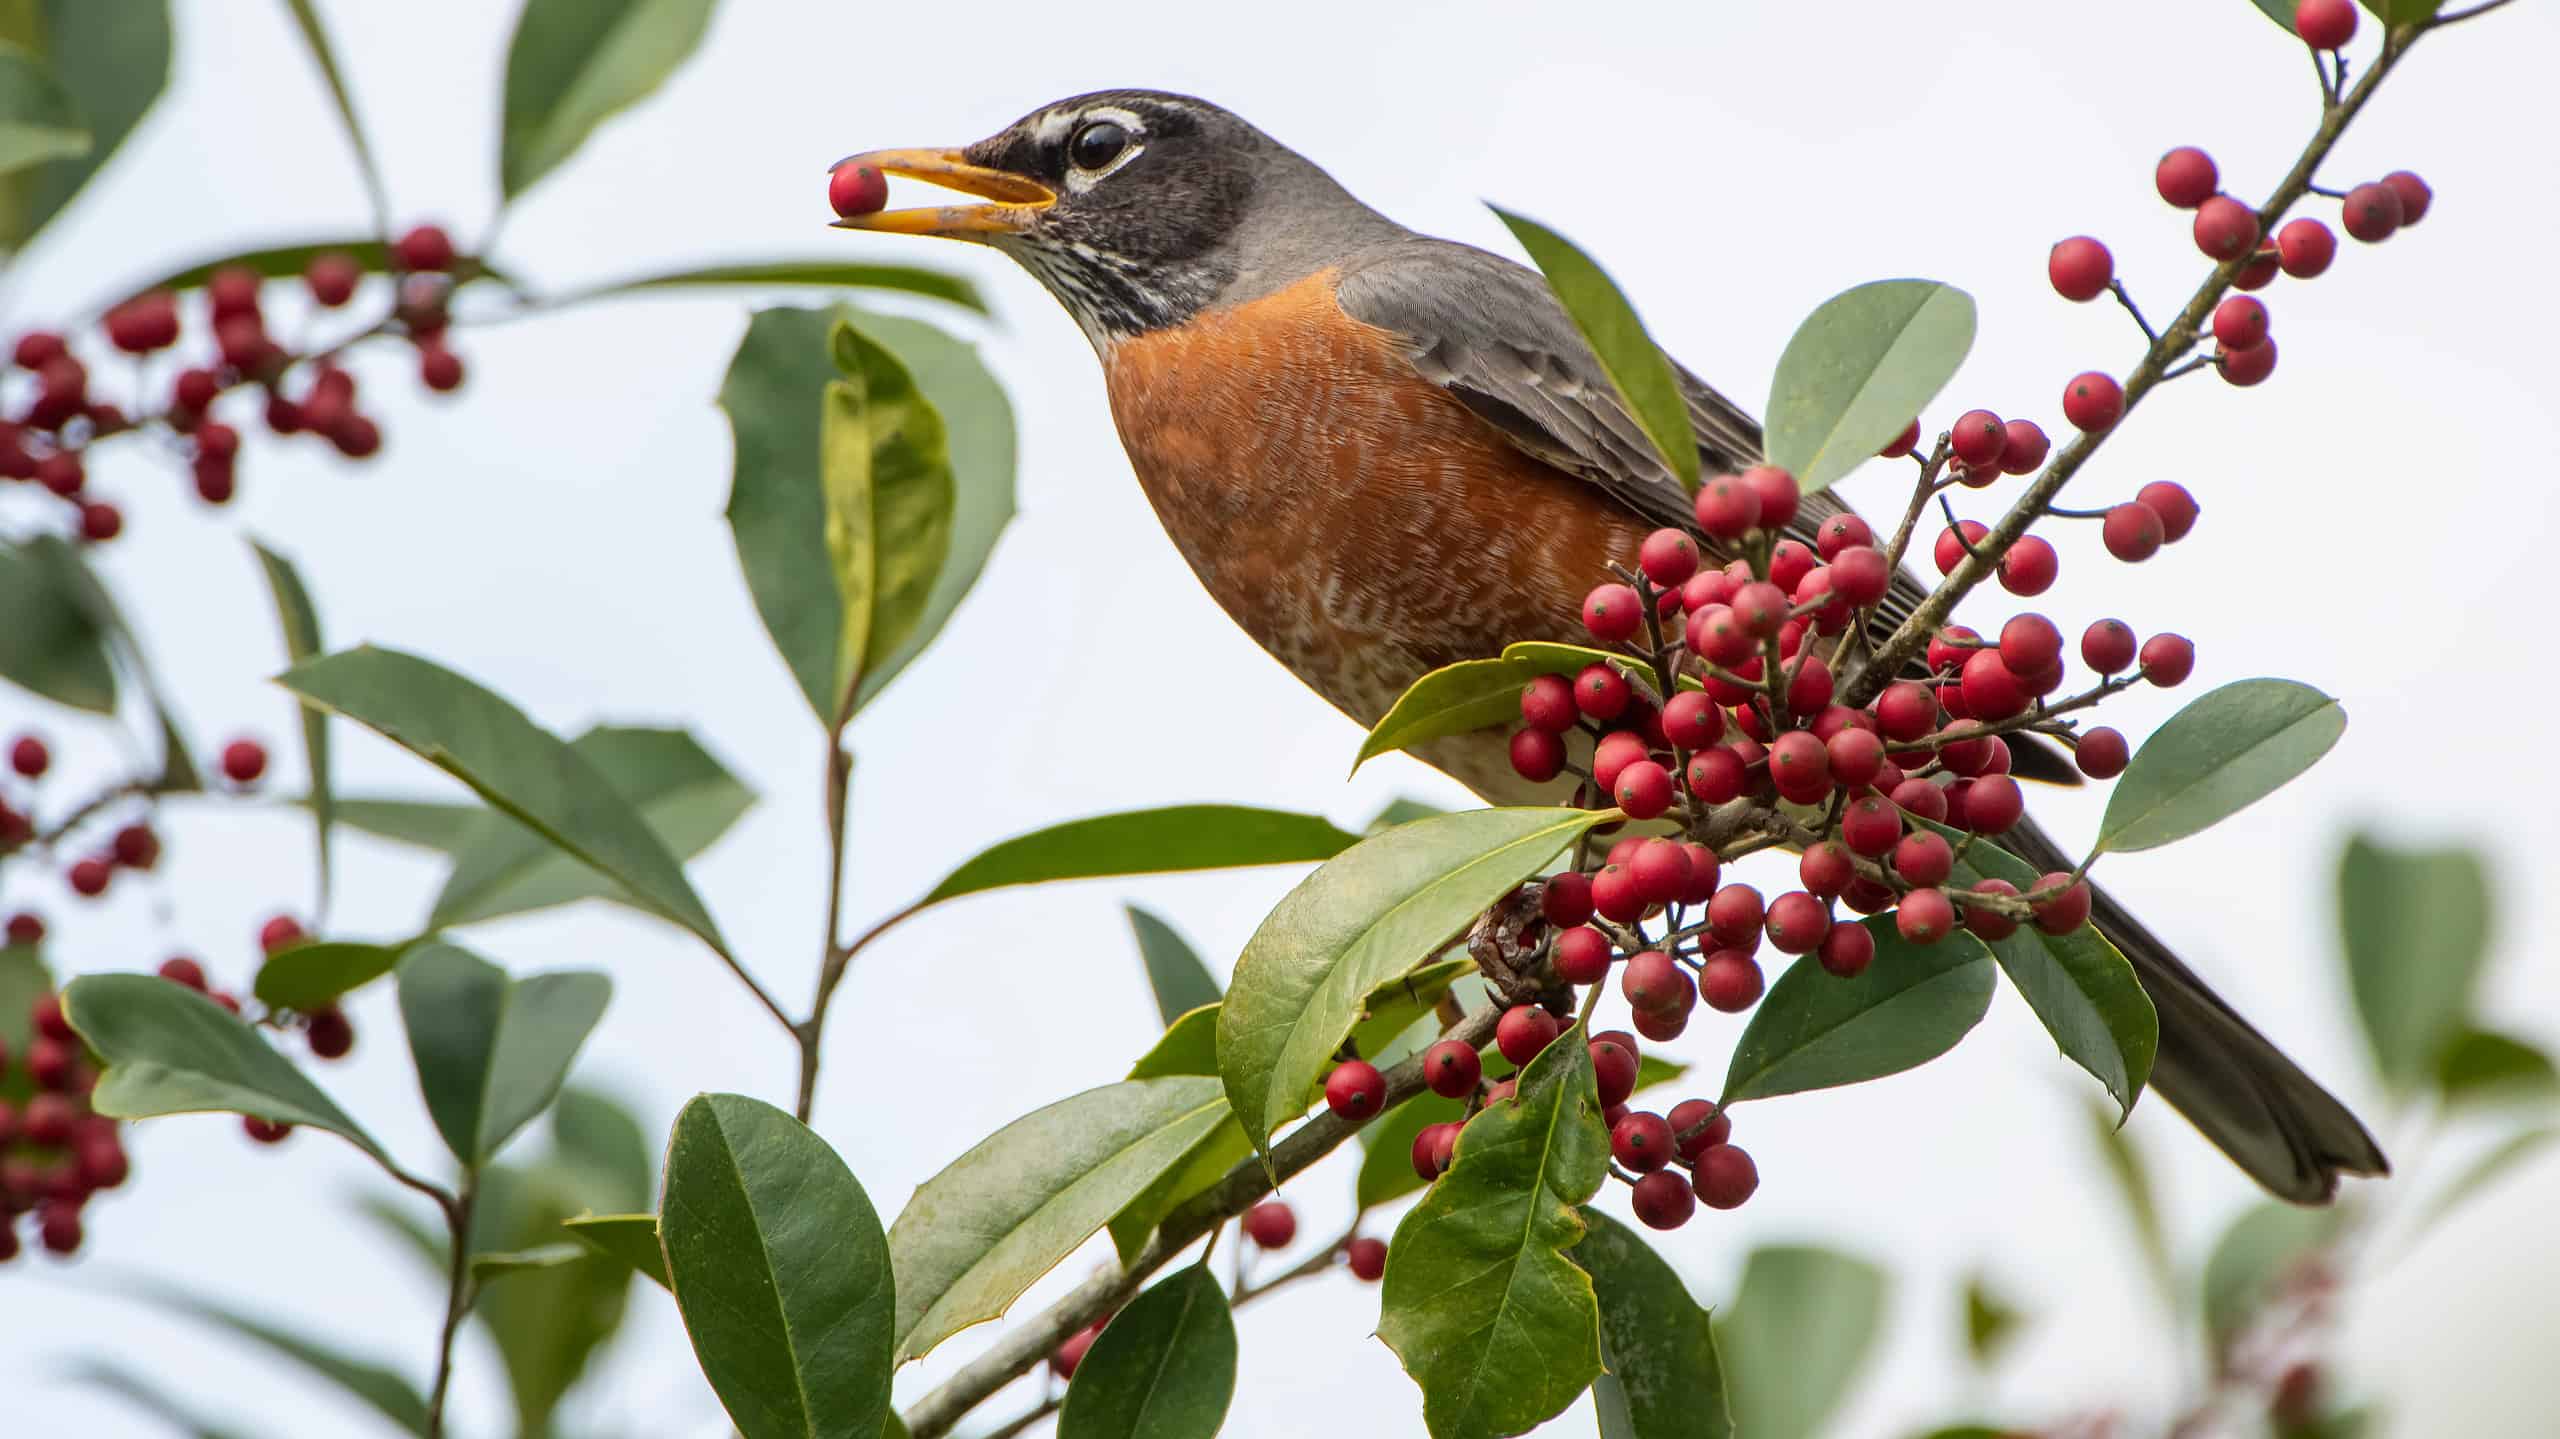 American Robin eating berries from a holly shrub.